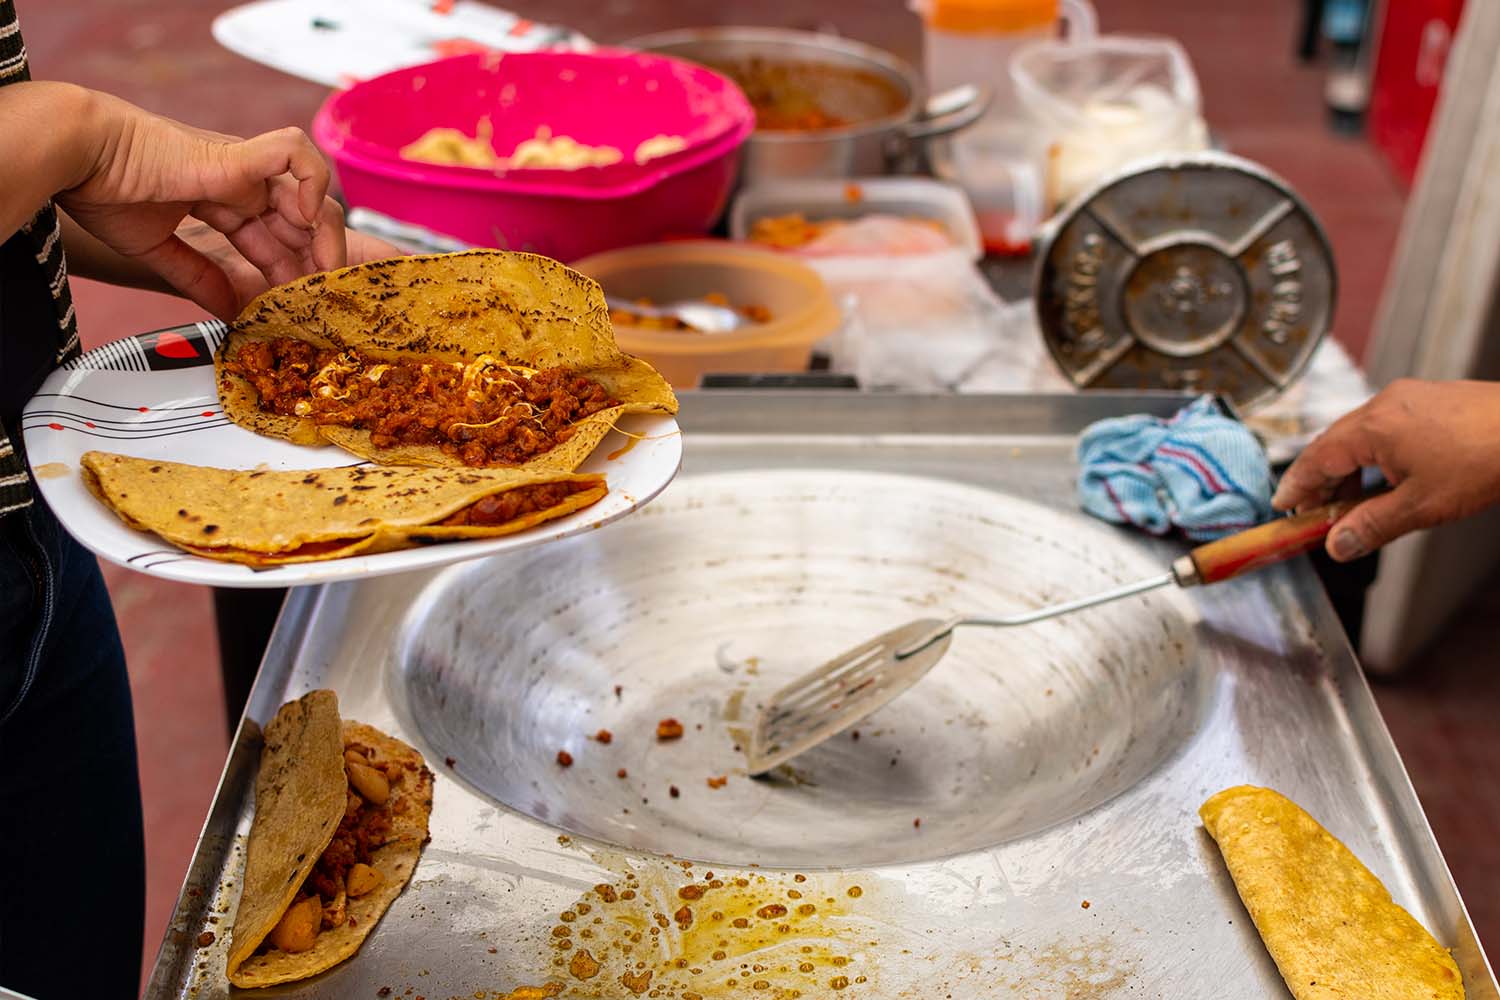 The preparation of typical Mexican street food